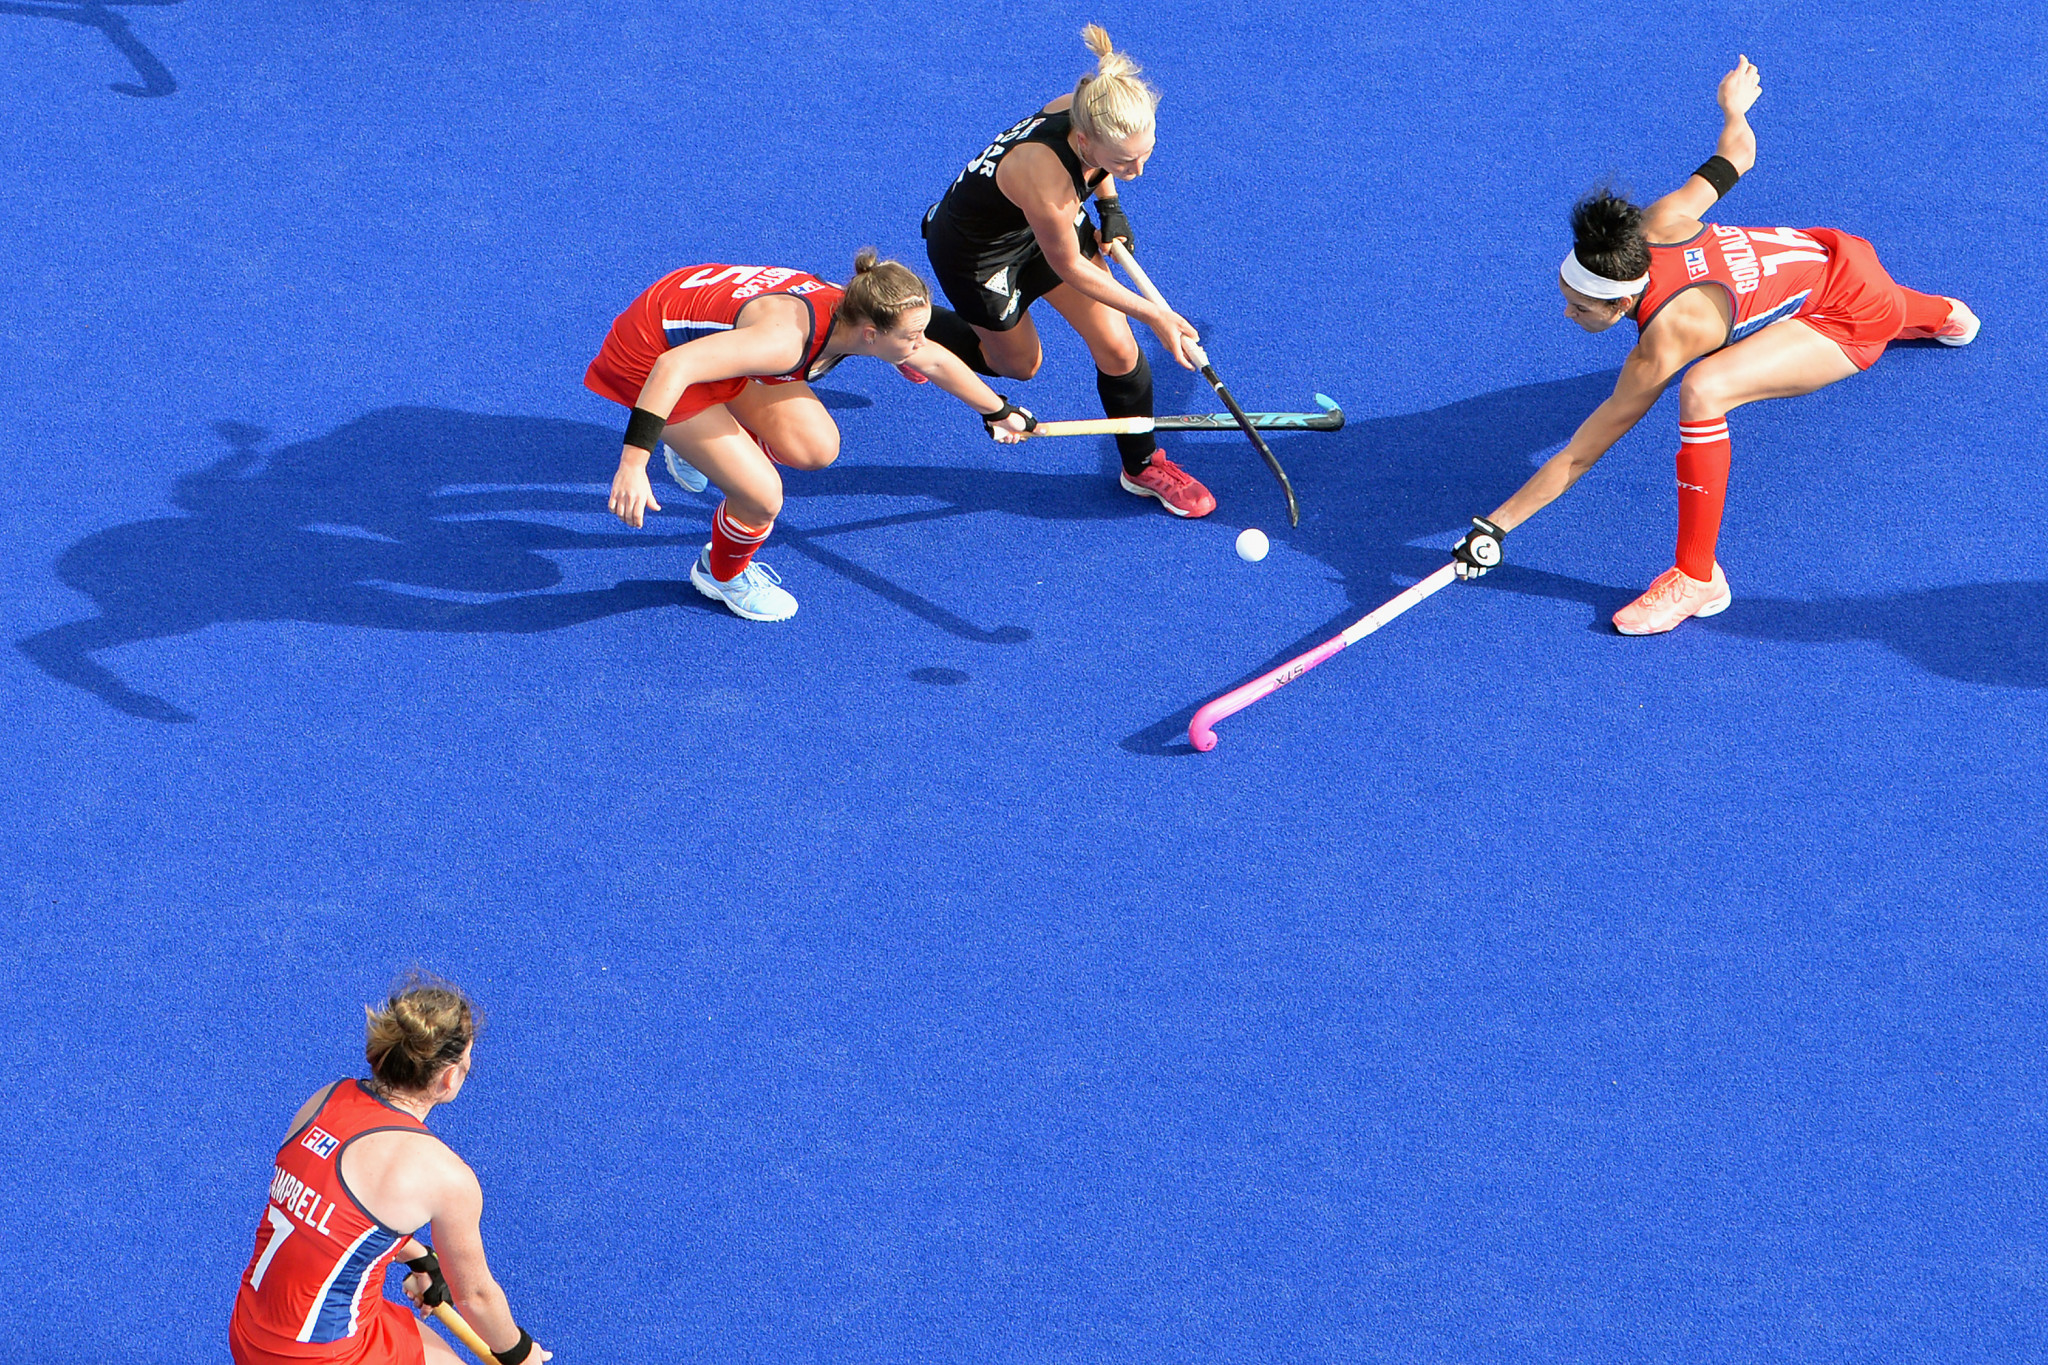 All FIH events are included as part of the deal ©Getty Images